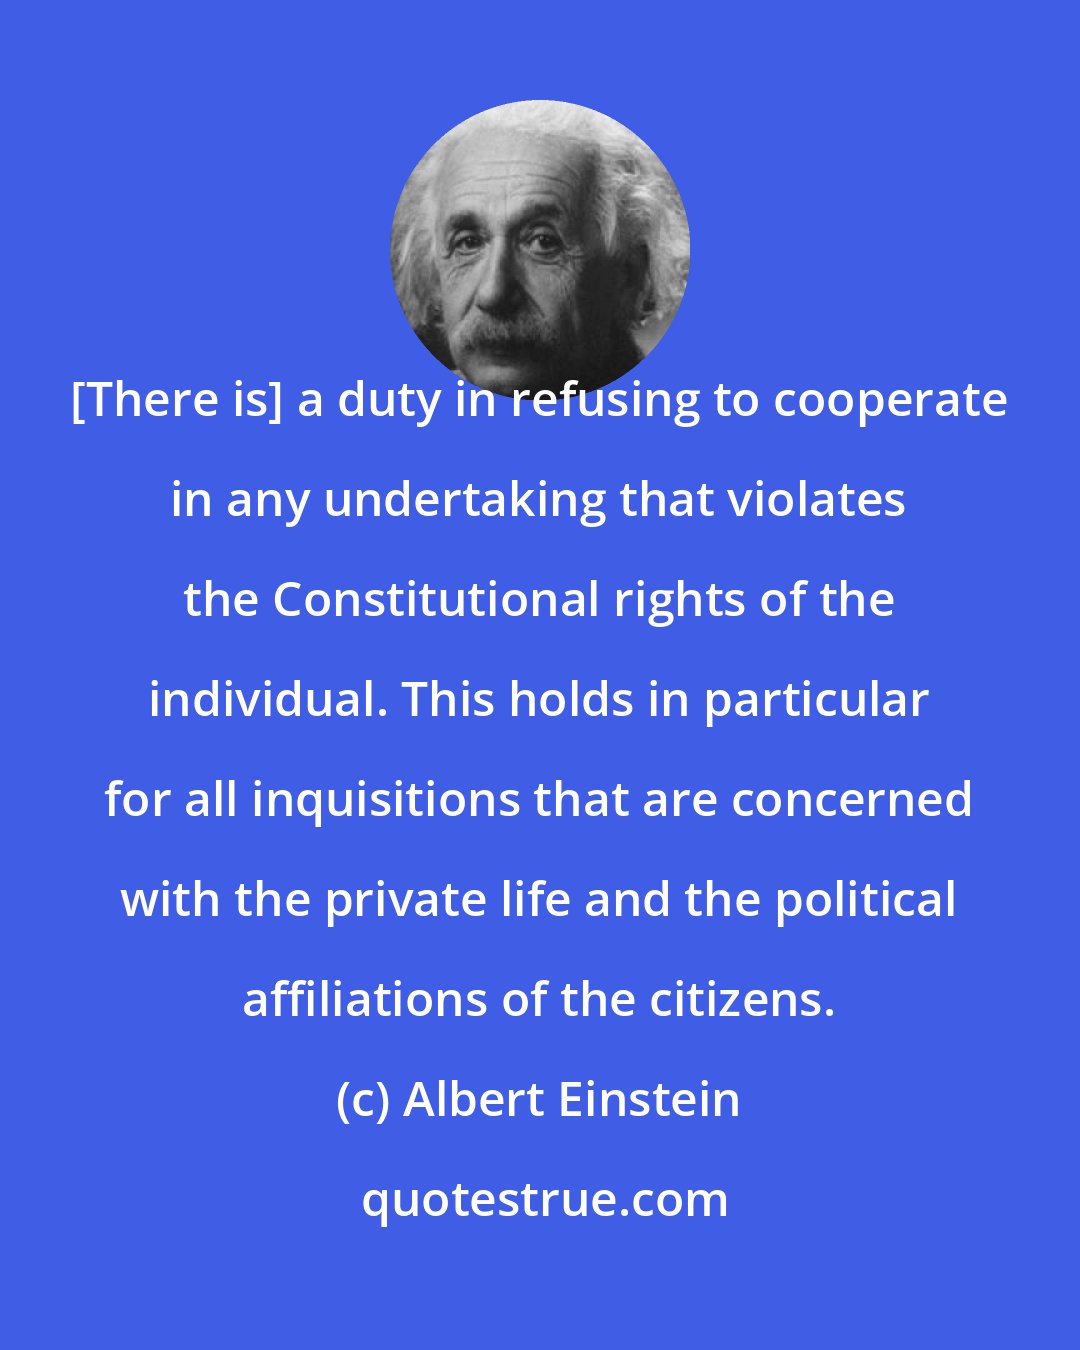 Albert Einstein: [There is] a duty in refusing to cooperate in any undertaking that violates the Constitutional rights of the individual. This holds in particular for all inquisitions that are concerned with the private life and the political affiliations of the citizens.